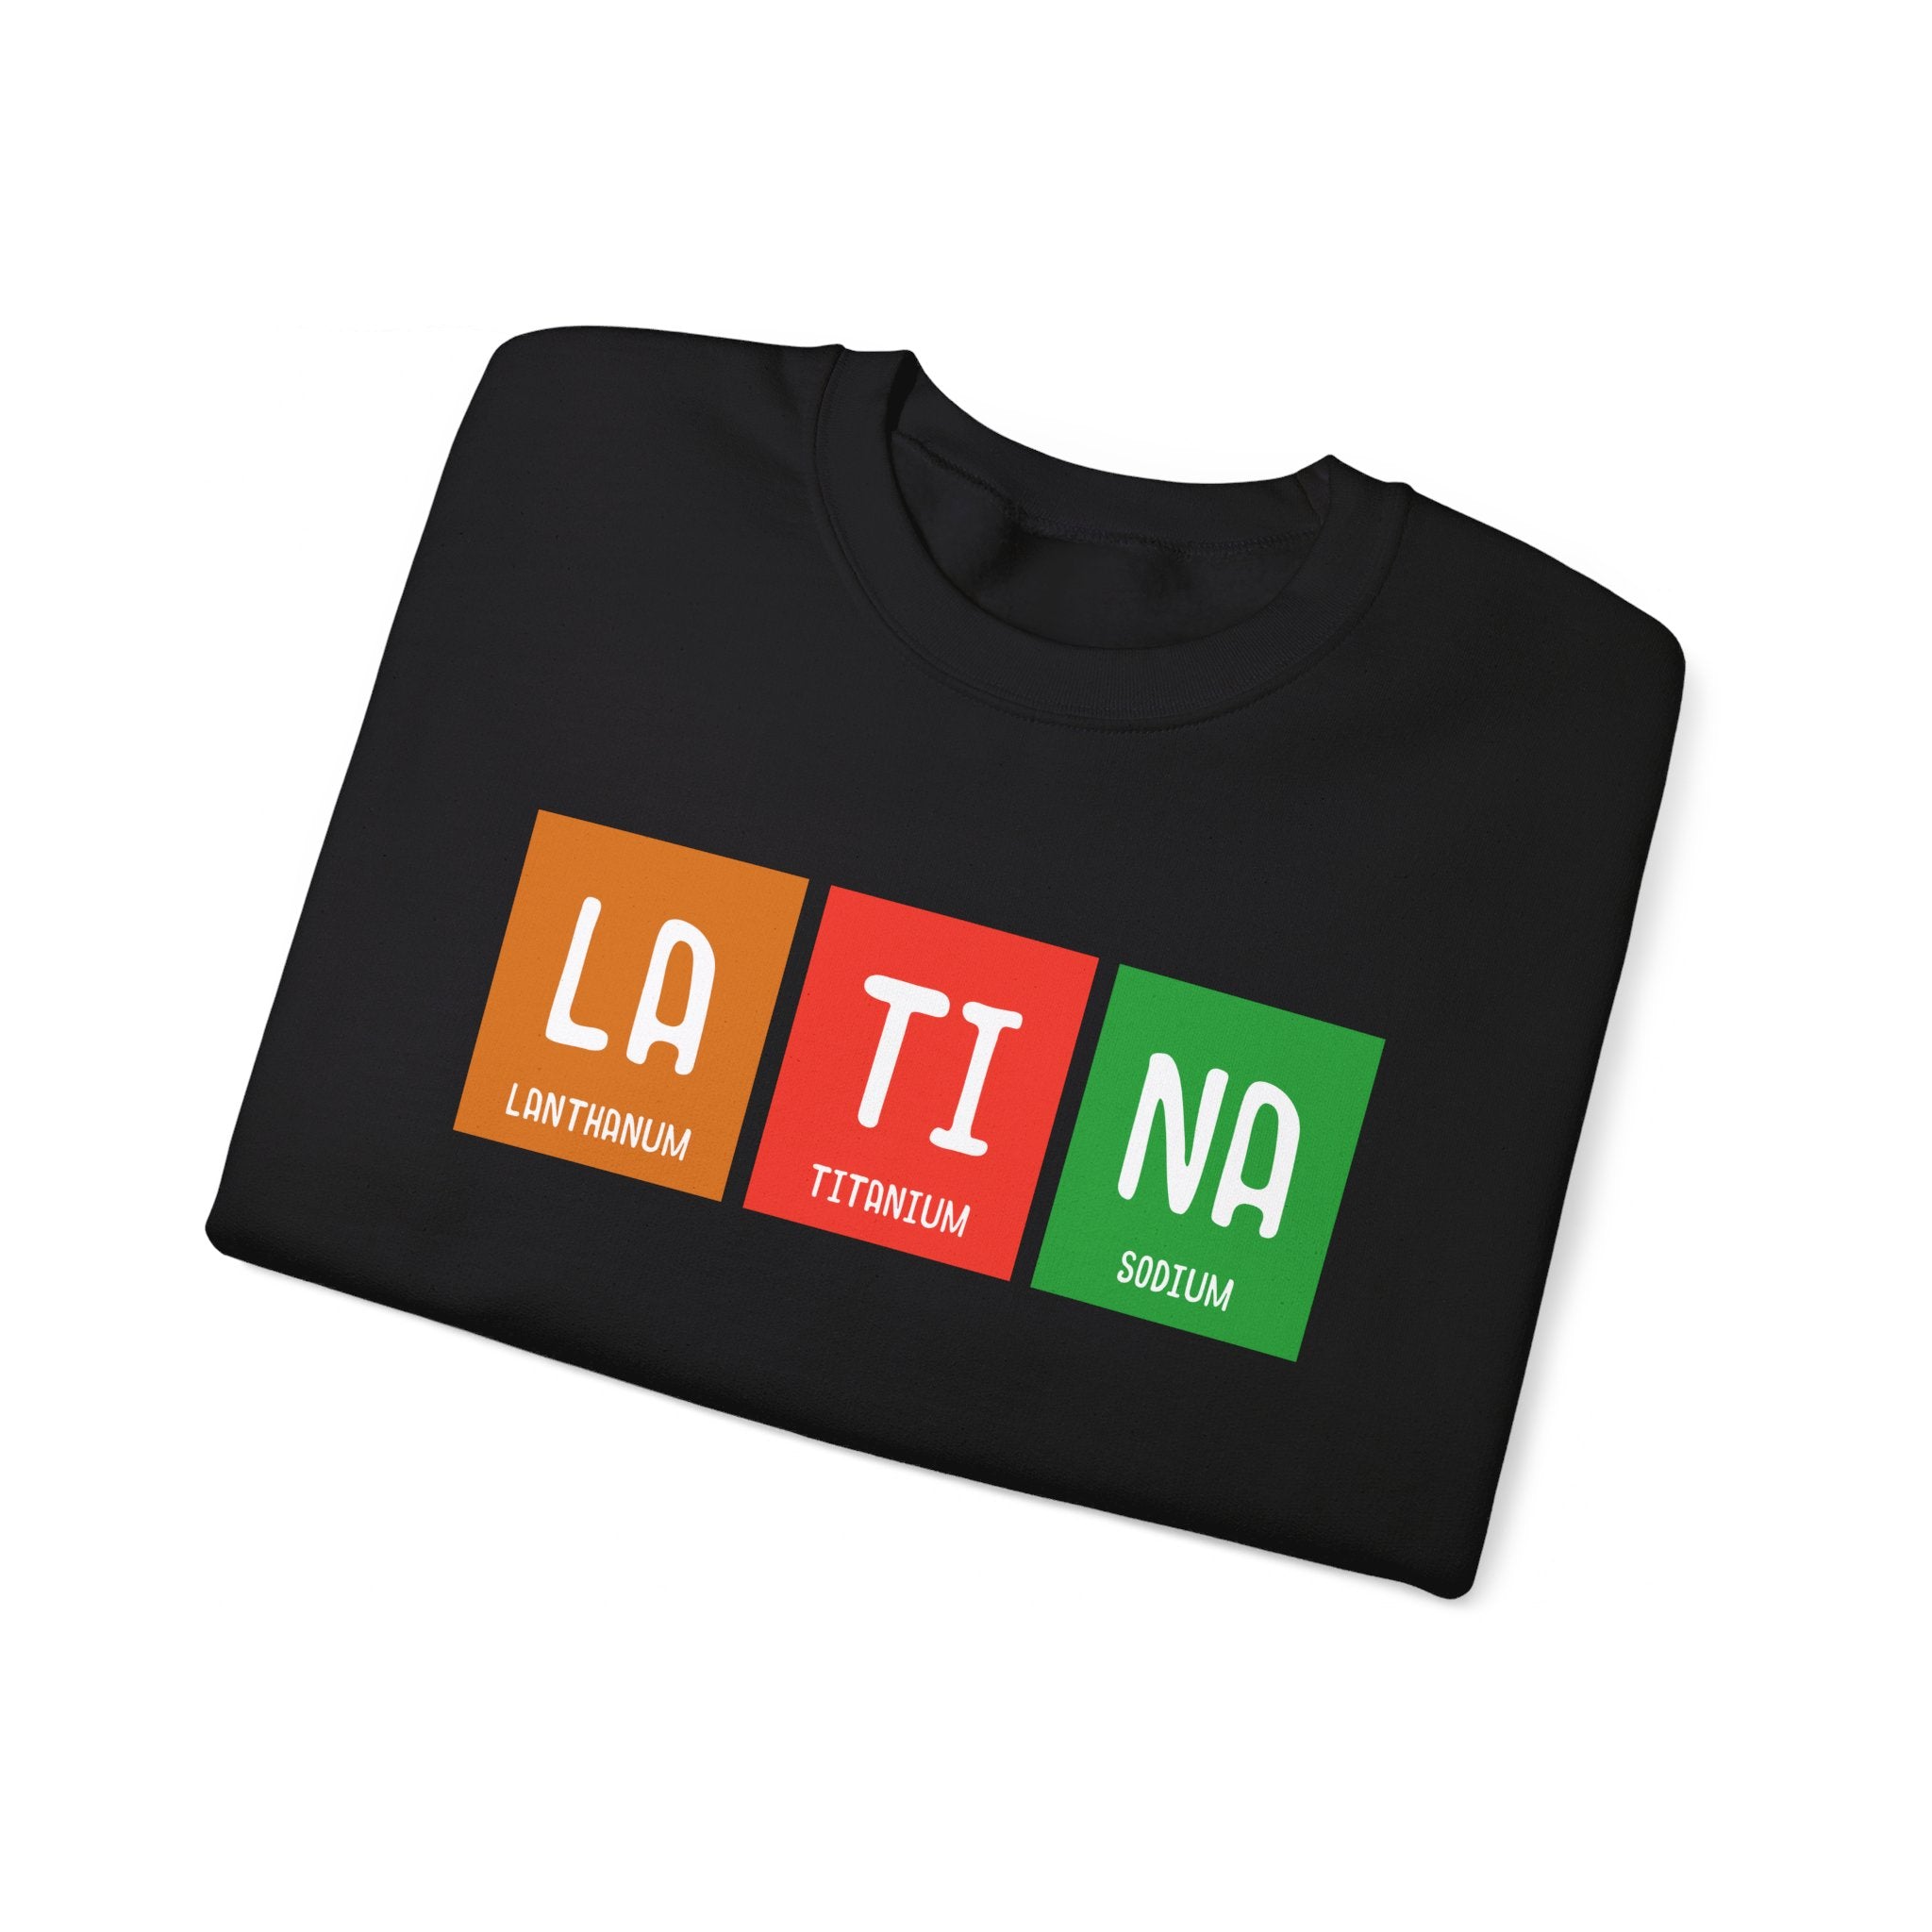 Experience the perfect blend of comfort and style with our LA-TI-NA - Sweatshirt, featuring the clever use of periodic table elements: Lanthanum (LA), Titanium (TI), and Sodium (NA). This winter essential is a must-have for your wardrobe.